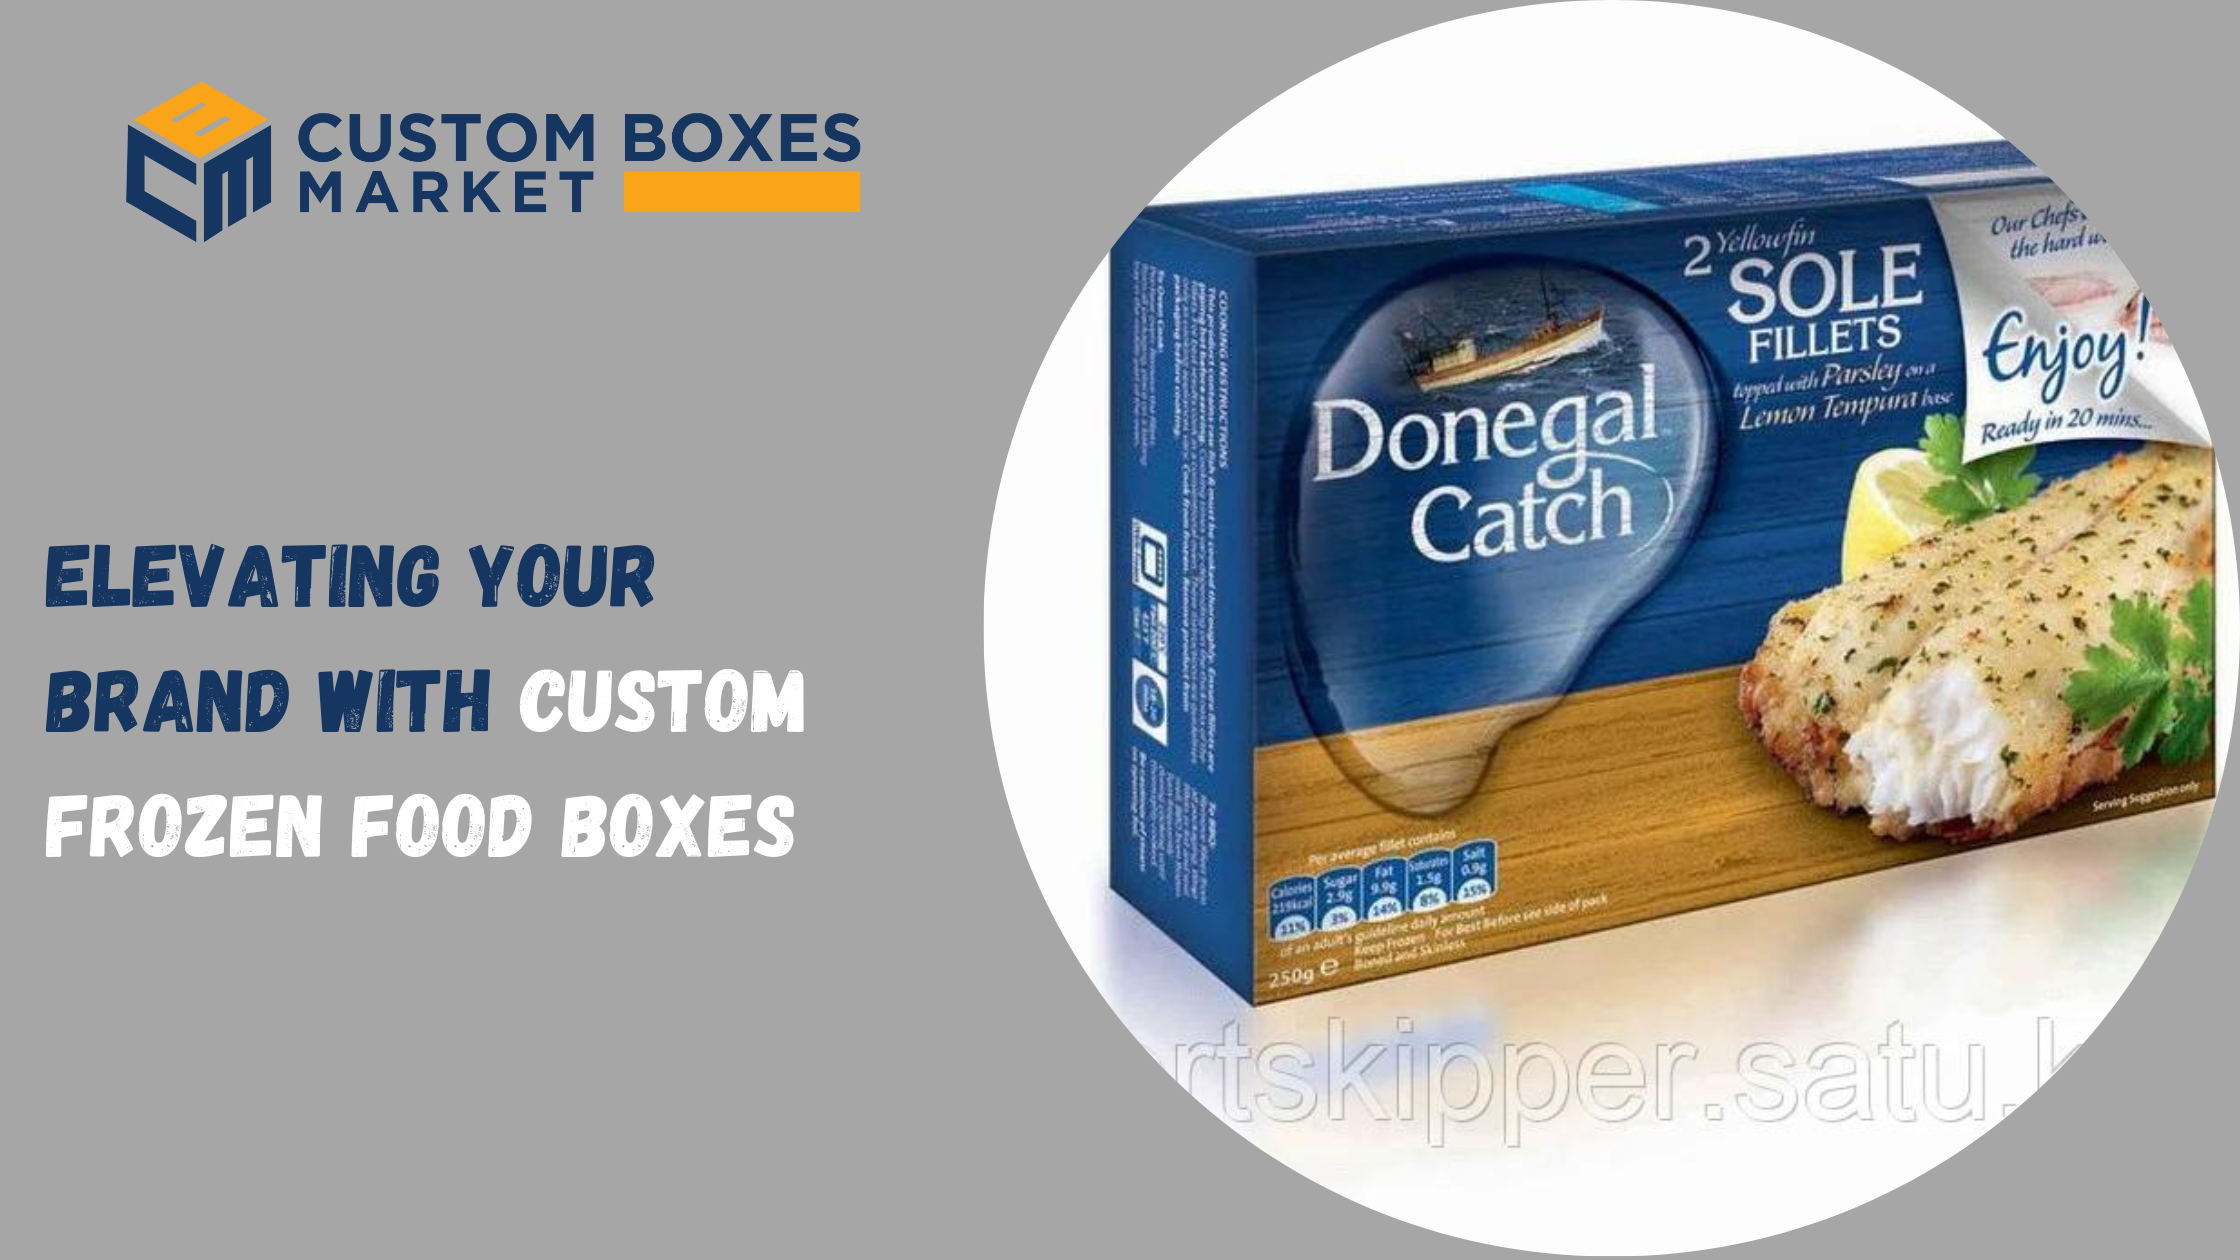 Elevating Your Brand with Custom Frozen Food Boxes